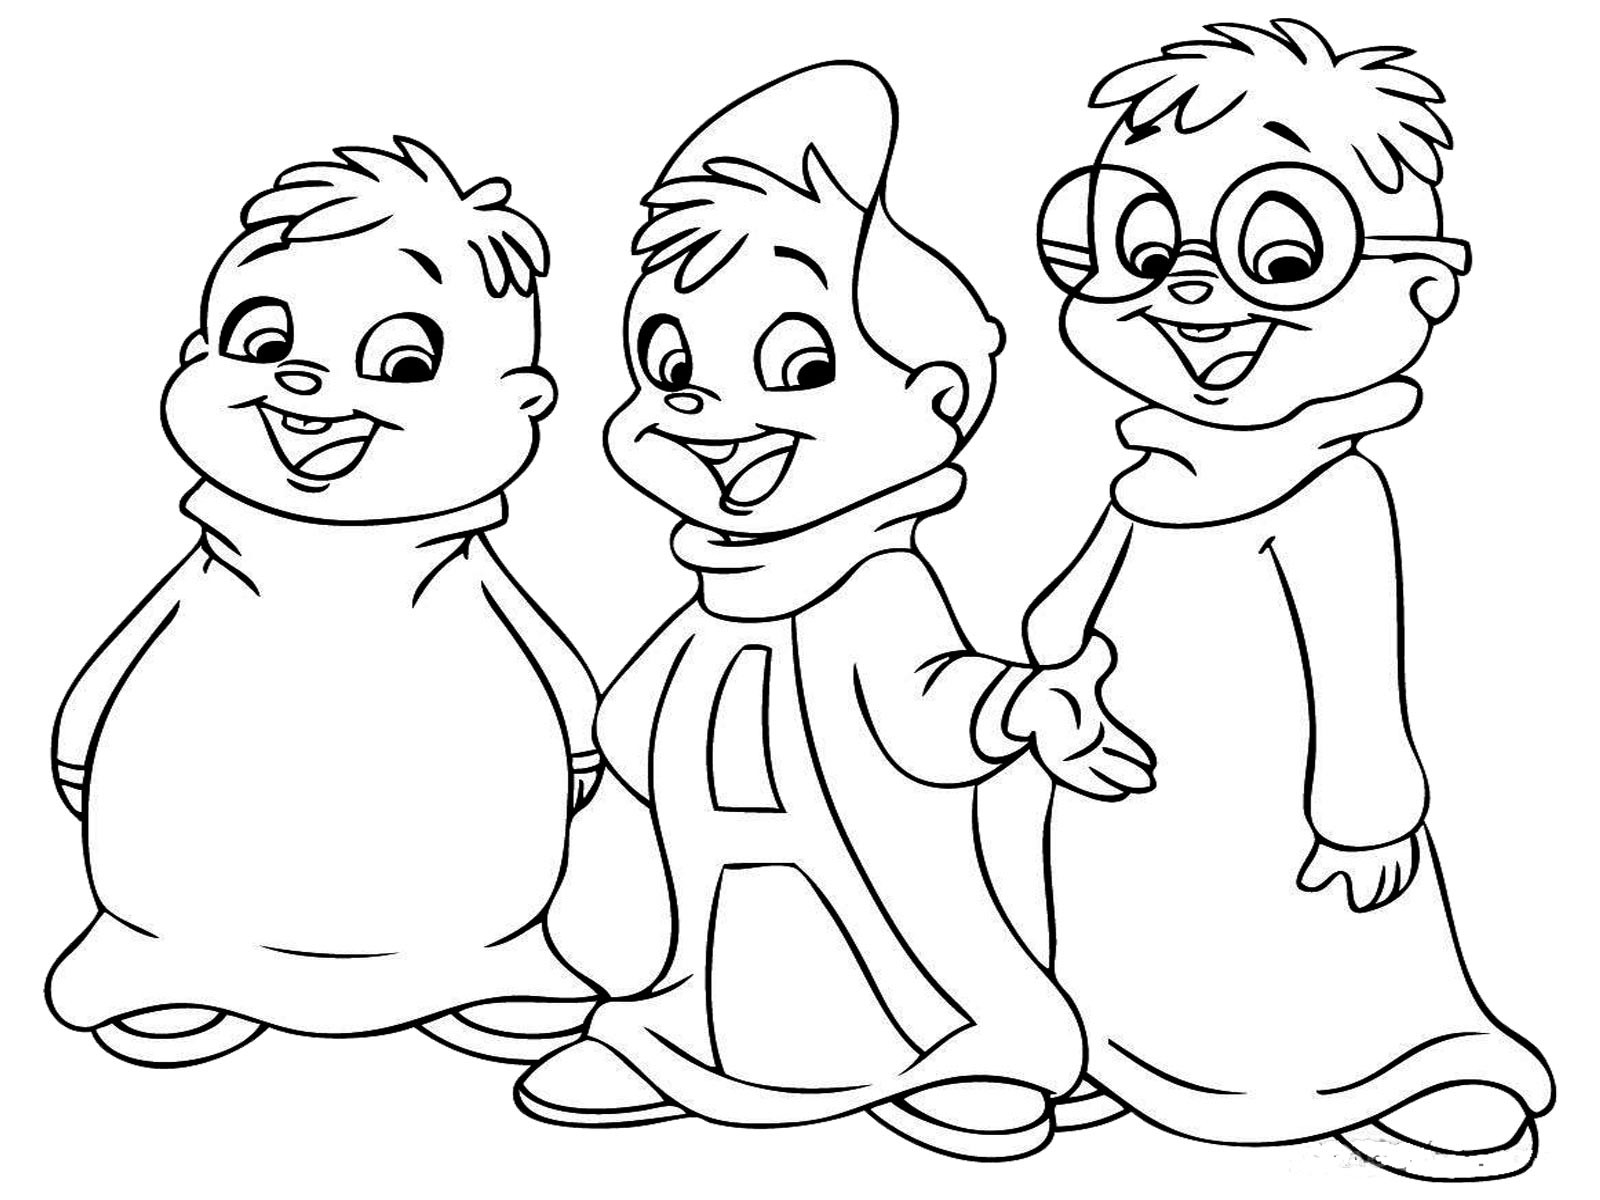 Cool Images Coloring Pages For Boys
 Coloring Pages for Boys 2018 Dr Odd